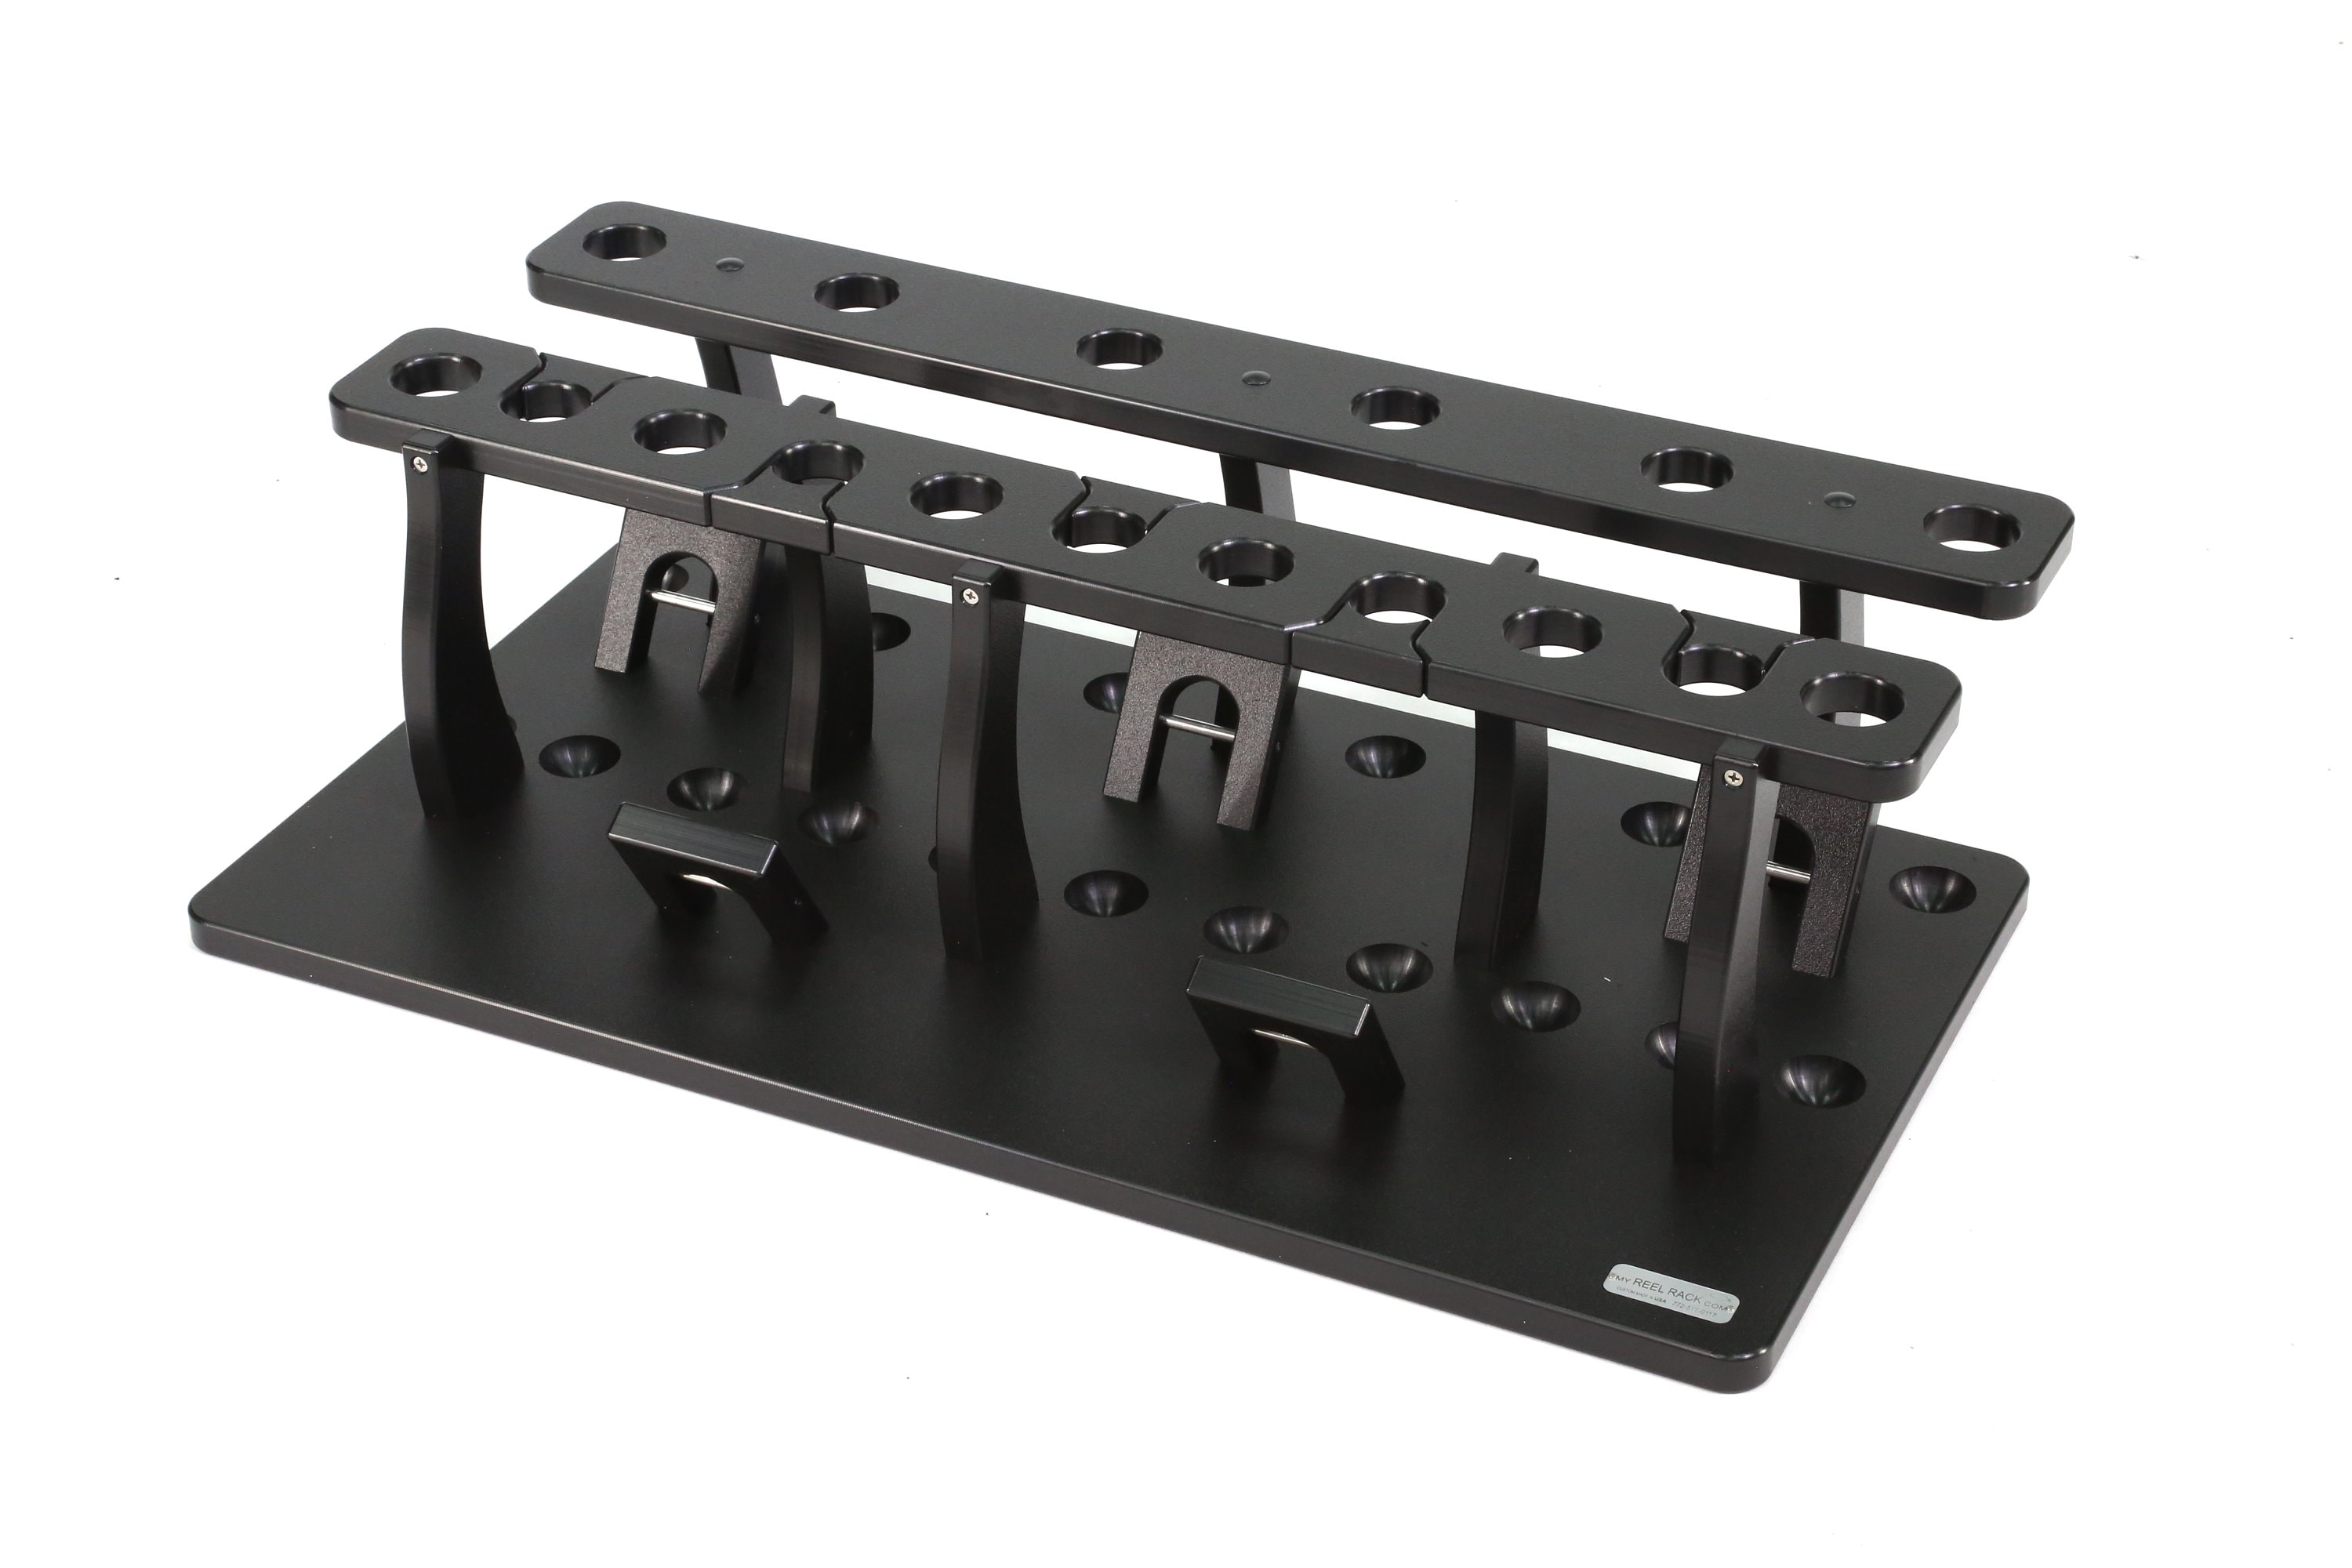 Big Game Rod Holder for 17 Rods plus the Option to Hold 5 Bent Butt Rods in  a Solid Black Starboard Rod Rack Pole Holder